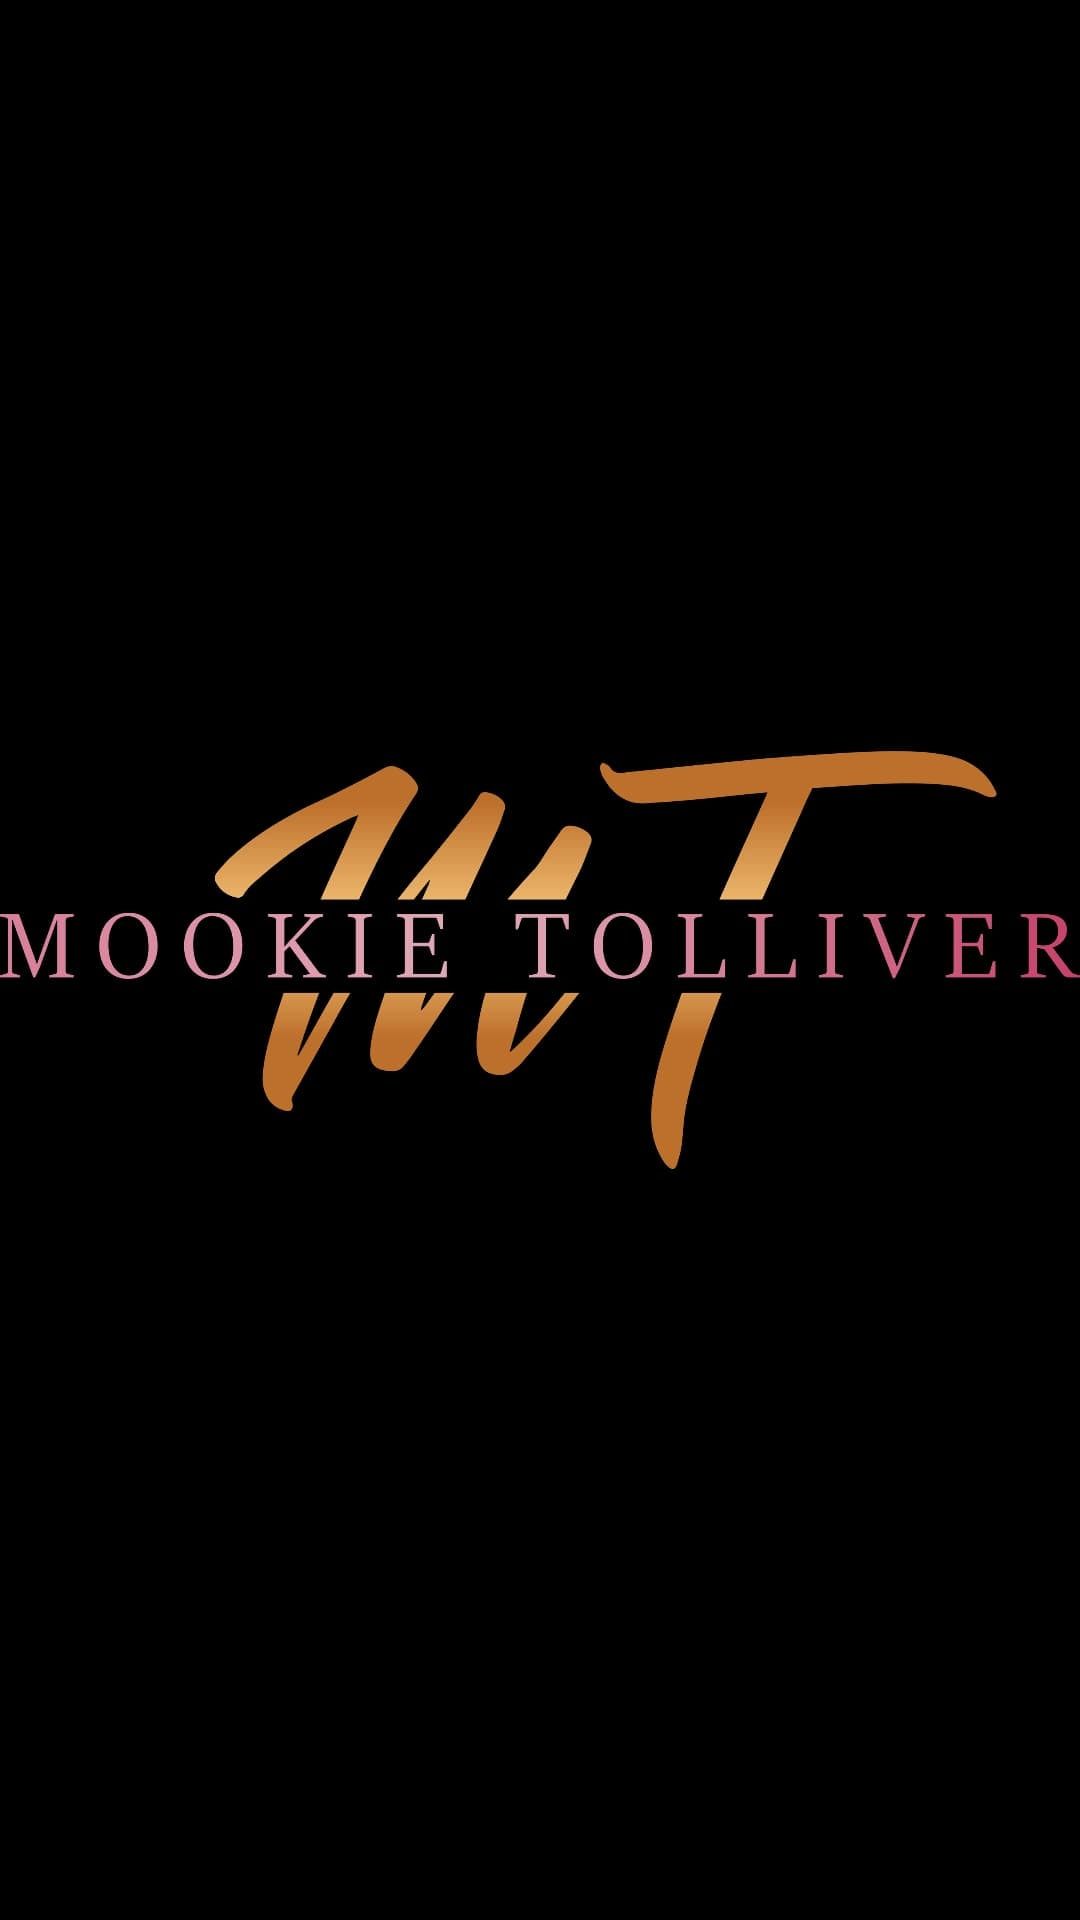 Mookie Tolliver & The MT Band Live